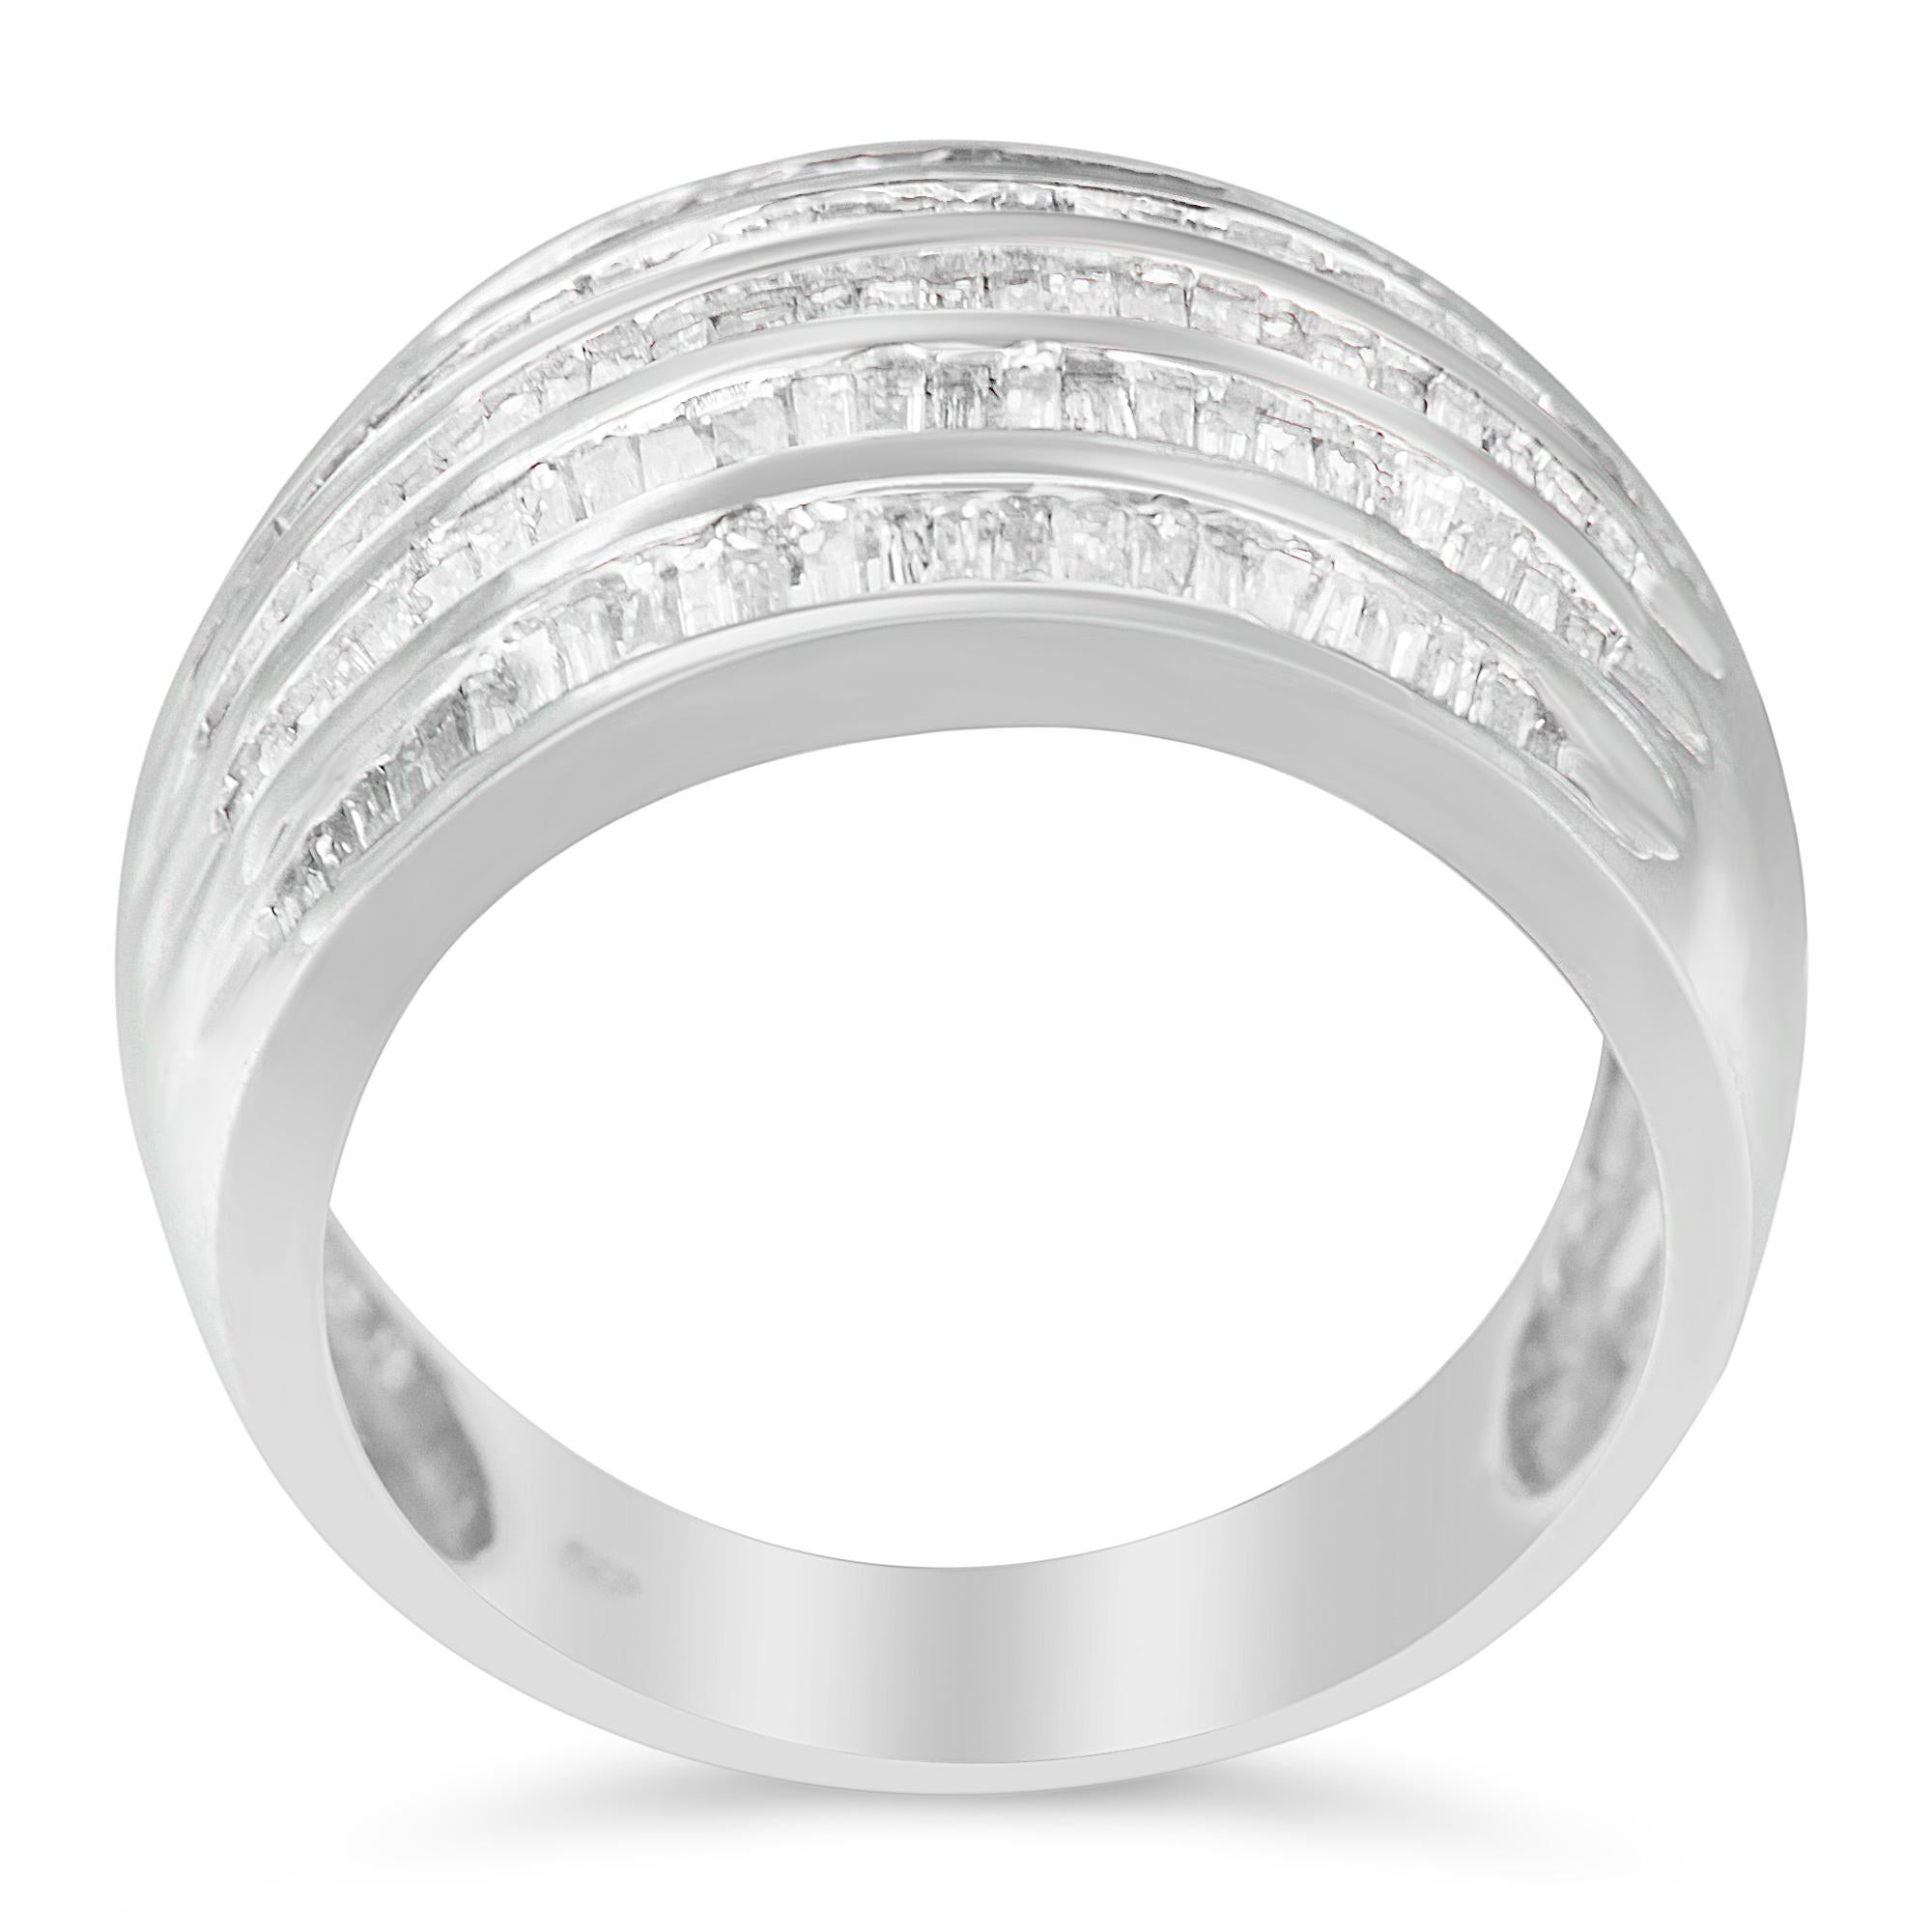 This wedding anniversary make her feel out of the world by presenting this diamond fashion band. The sterling silver band, features six sleek rows encrusted with precious baguette cut diamonds that lend the ring an exquisite appeal. Designed with